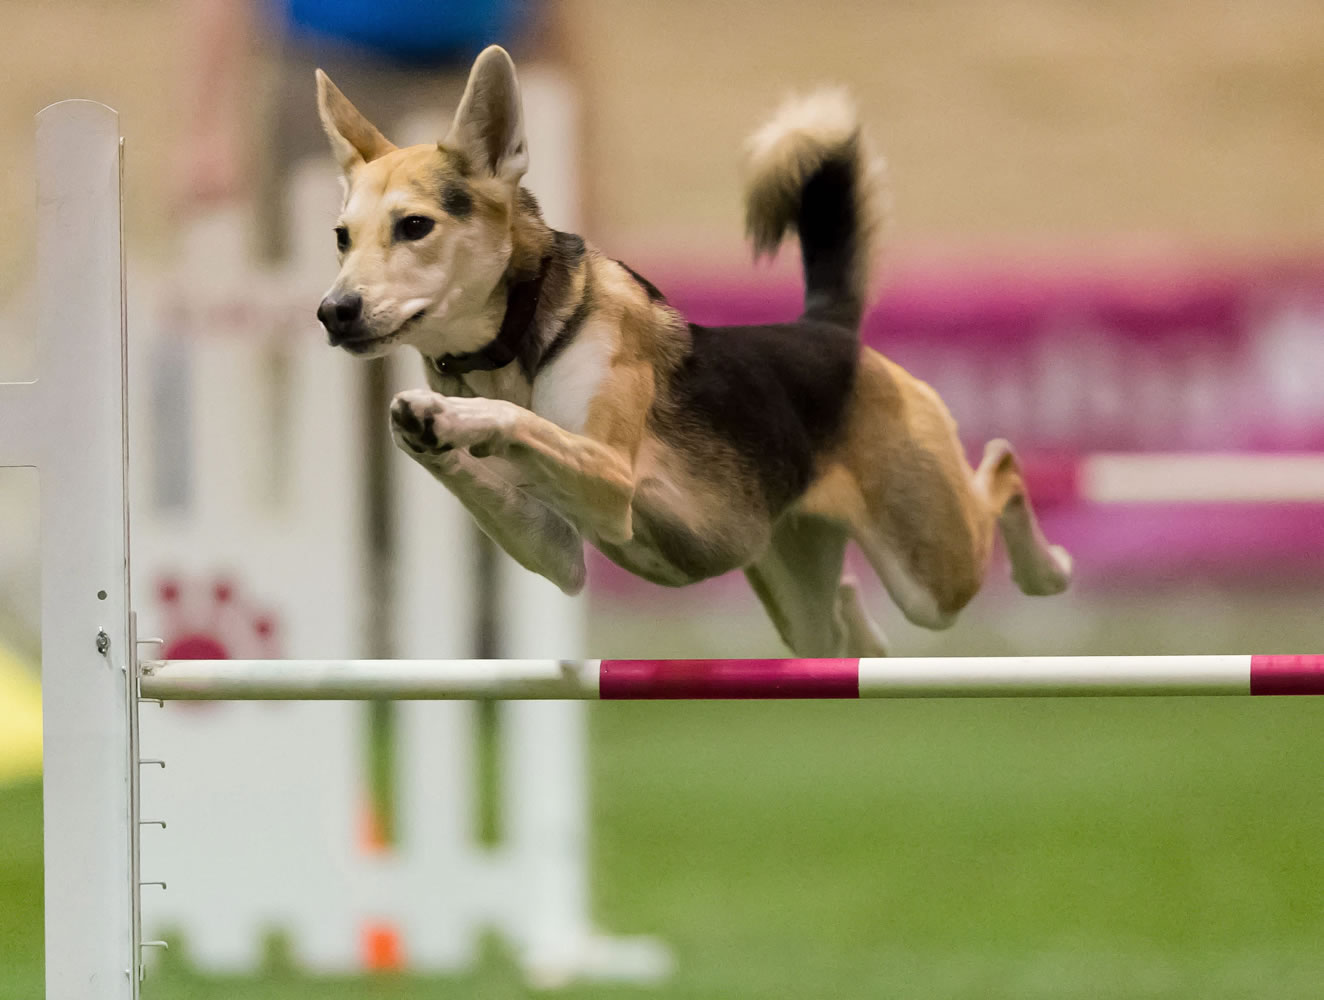 Roo! clears a hurdle during an agility competition Dec. 12 in Orlando, Fla. The husky mix will be one of about 225 agility dogs whizzing through tunnels, around poles and over jumps as she competes in the Westminster Dog Show's new agility competition in February 2014.